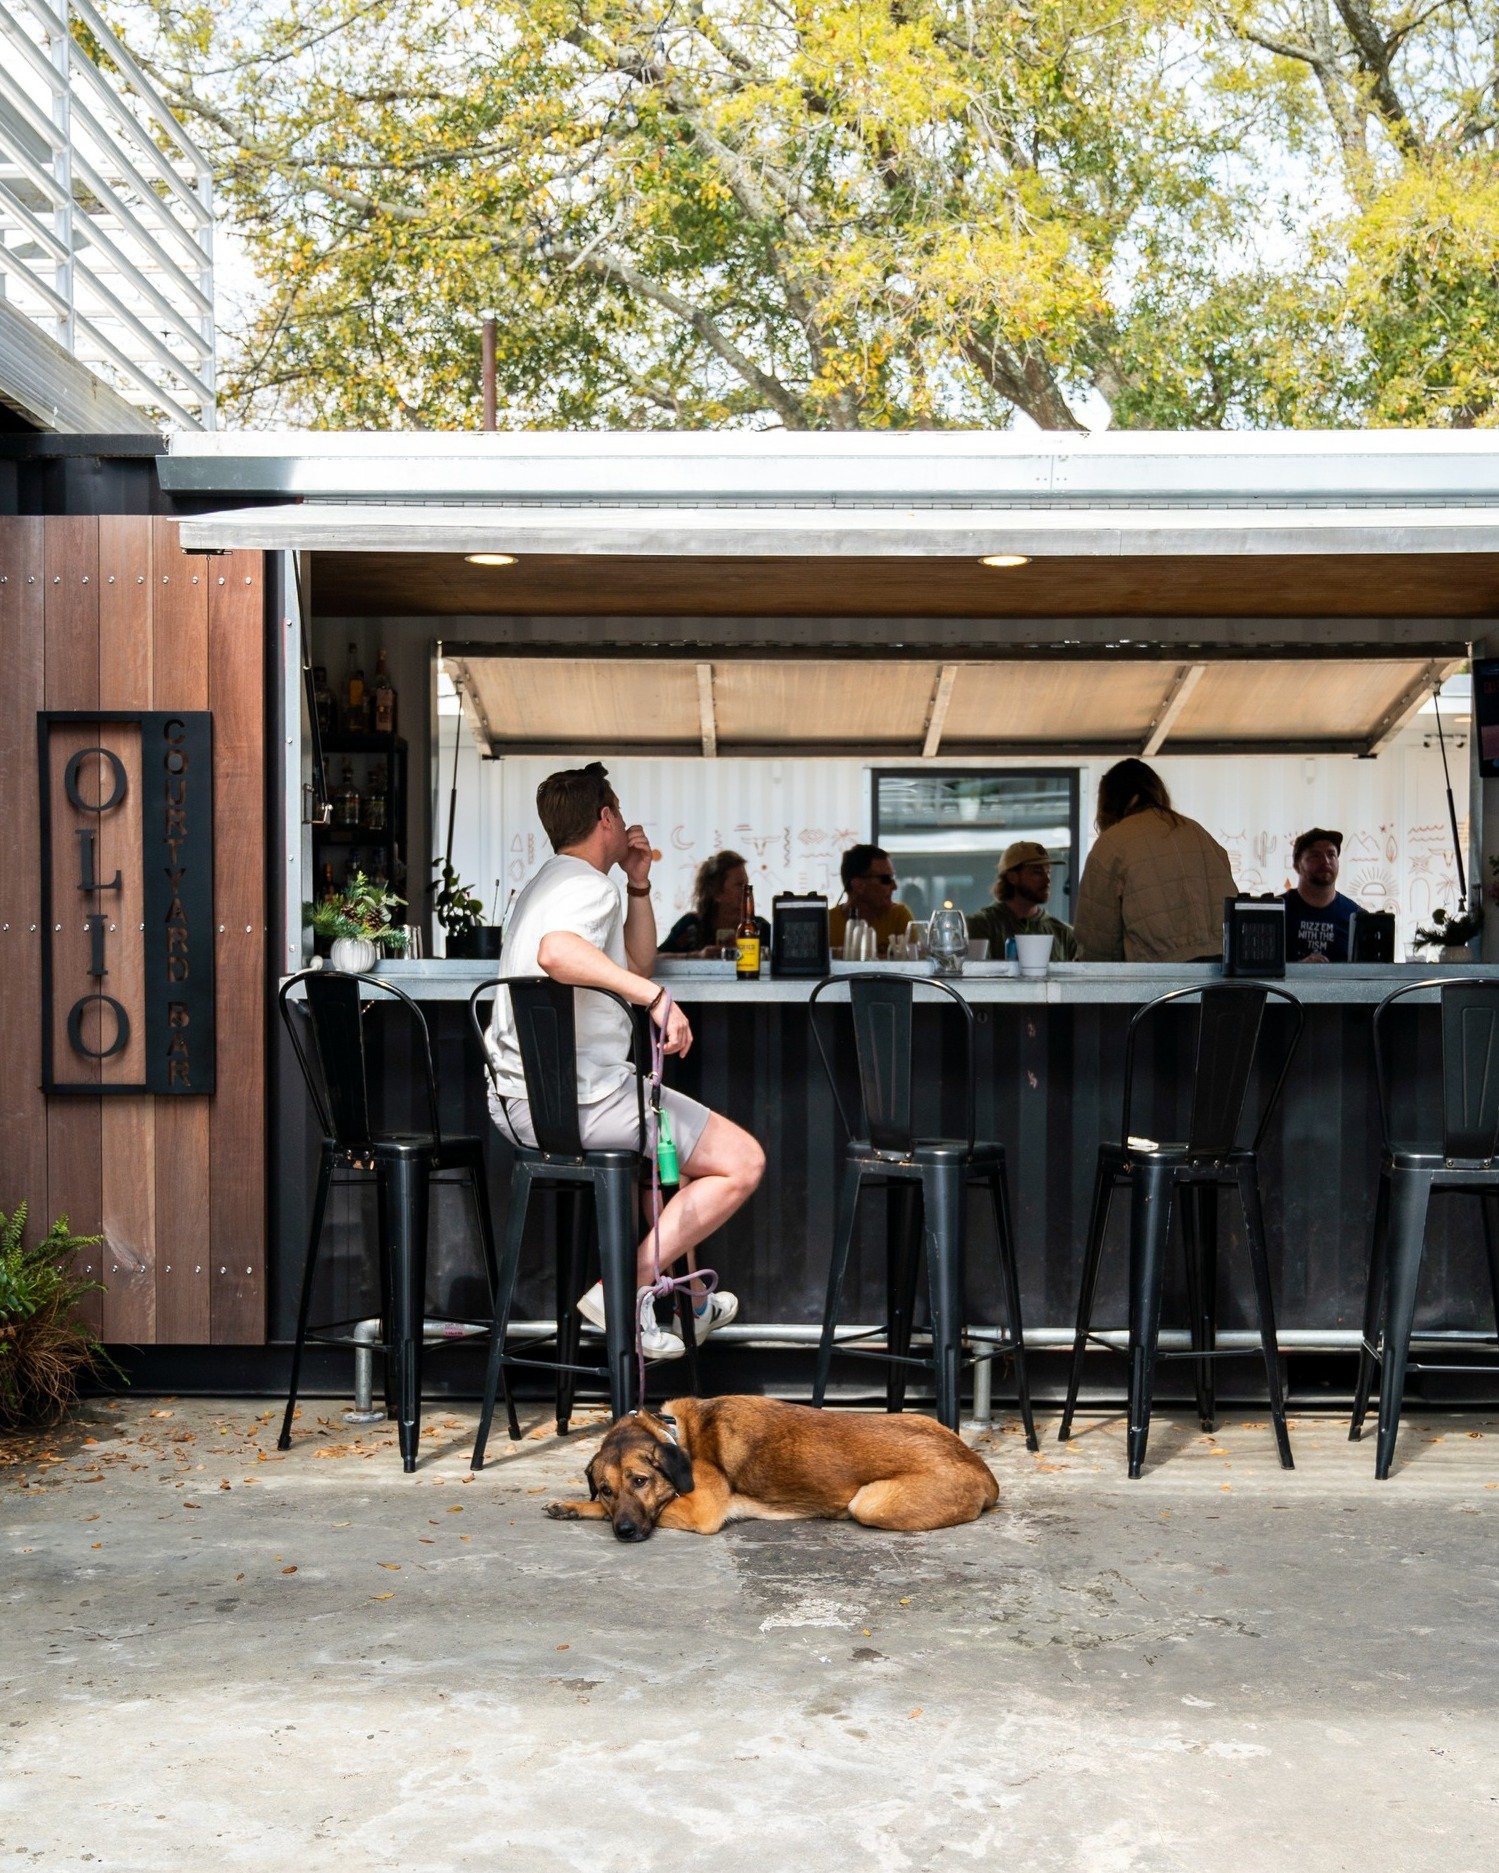 Happy Friday! 🍻 Come chill in the district this weekend (just like this super cute pup). @olio_courtyardbar is a great place to start the day/night! After a drink at Olio, make sure to explore the rest of our neighborhood&rsquo;s bars, local eaterie